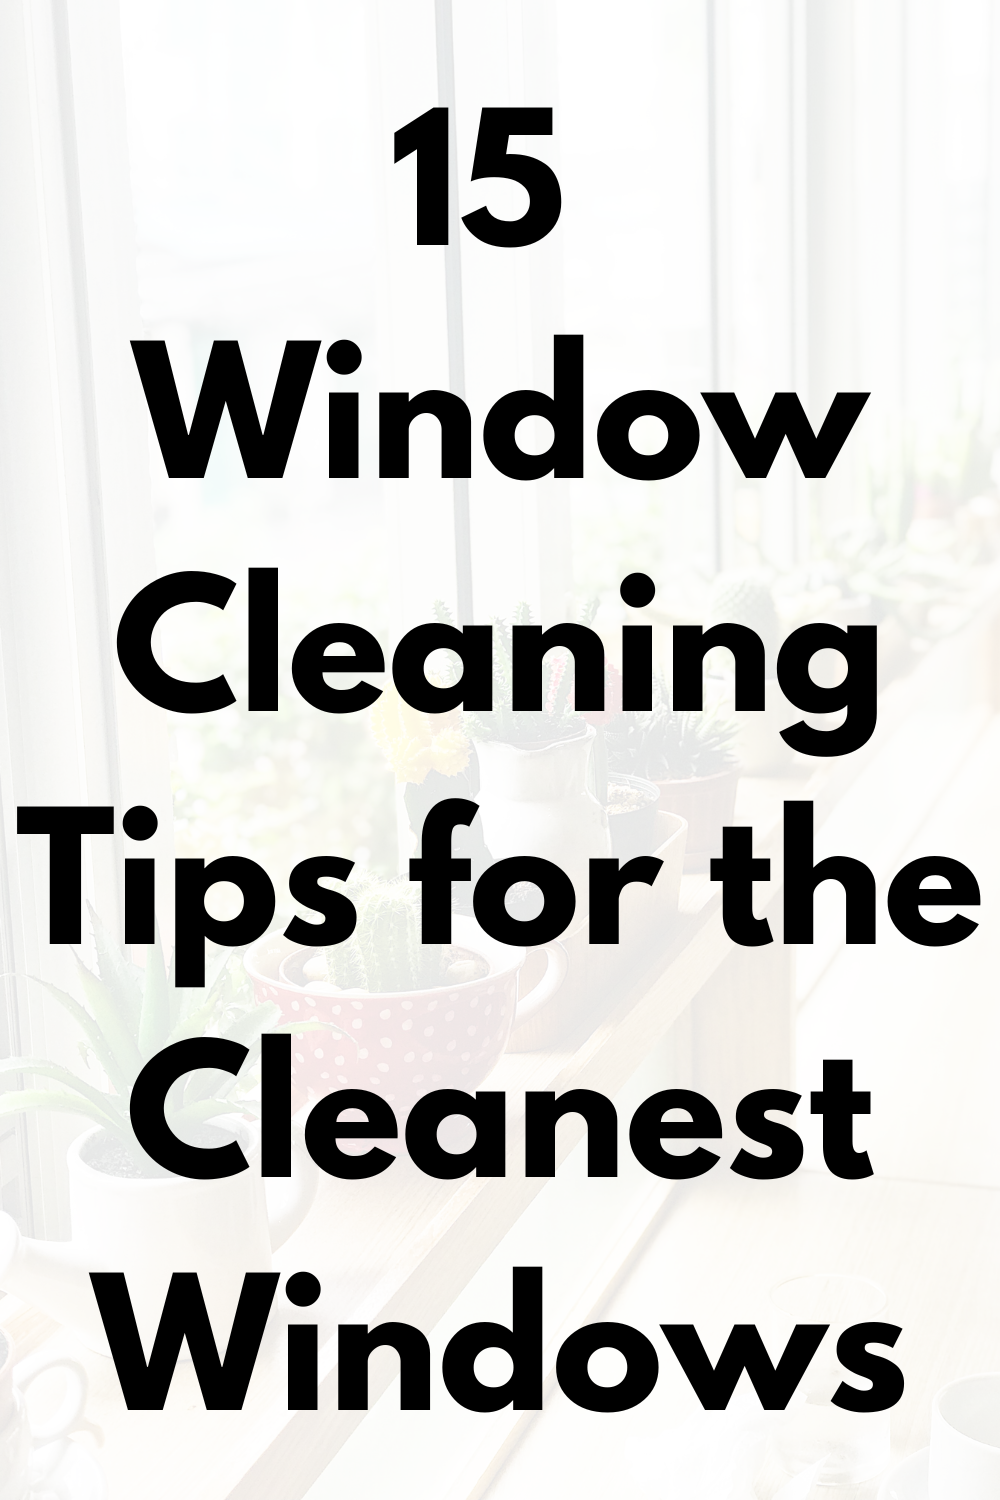 15 Window Cleaning Tips for the Cleanest Windows